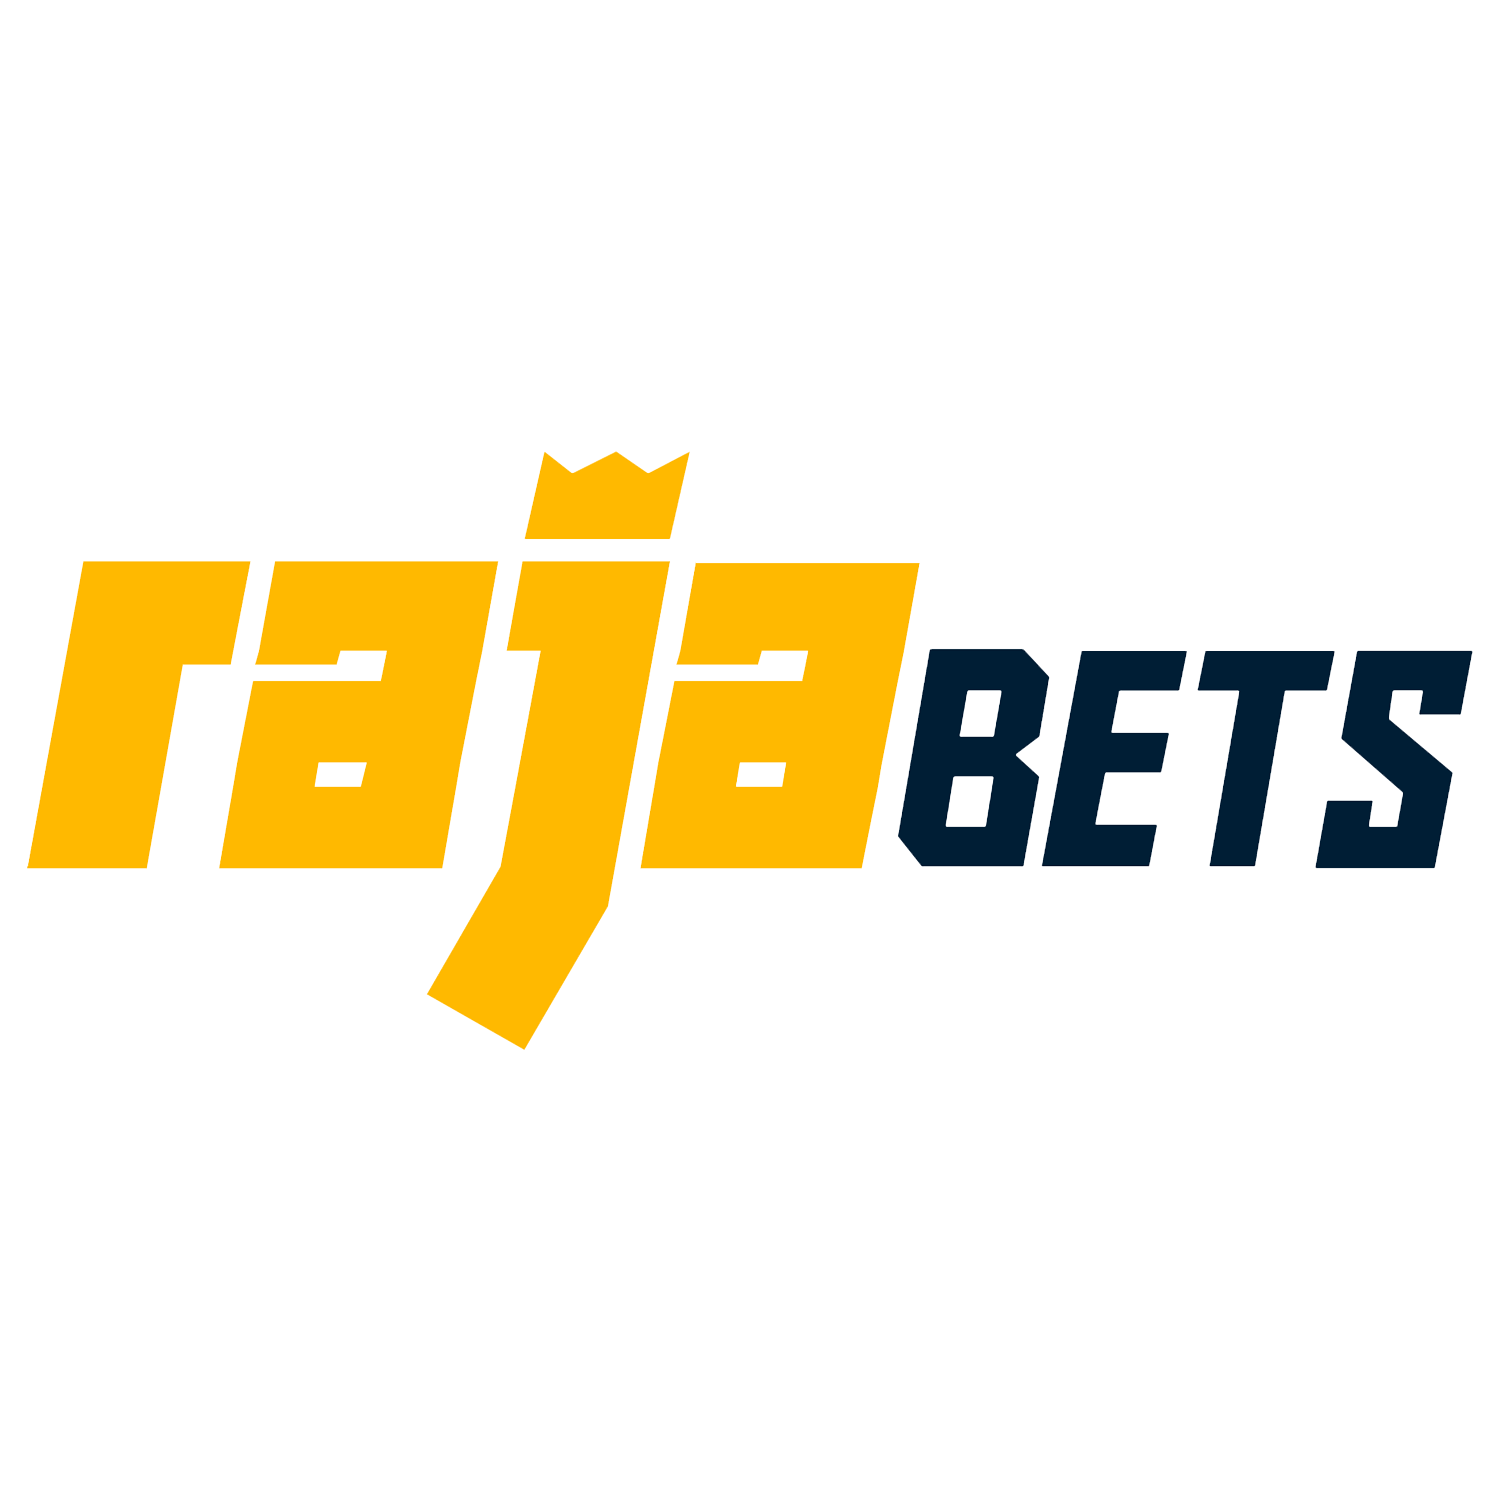 From this article, you learn about betting and playing casino games on Rajabets.